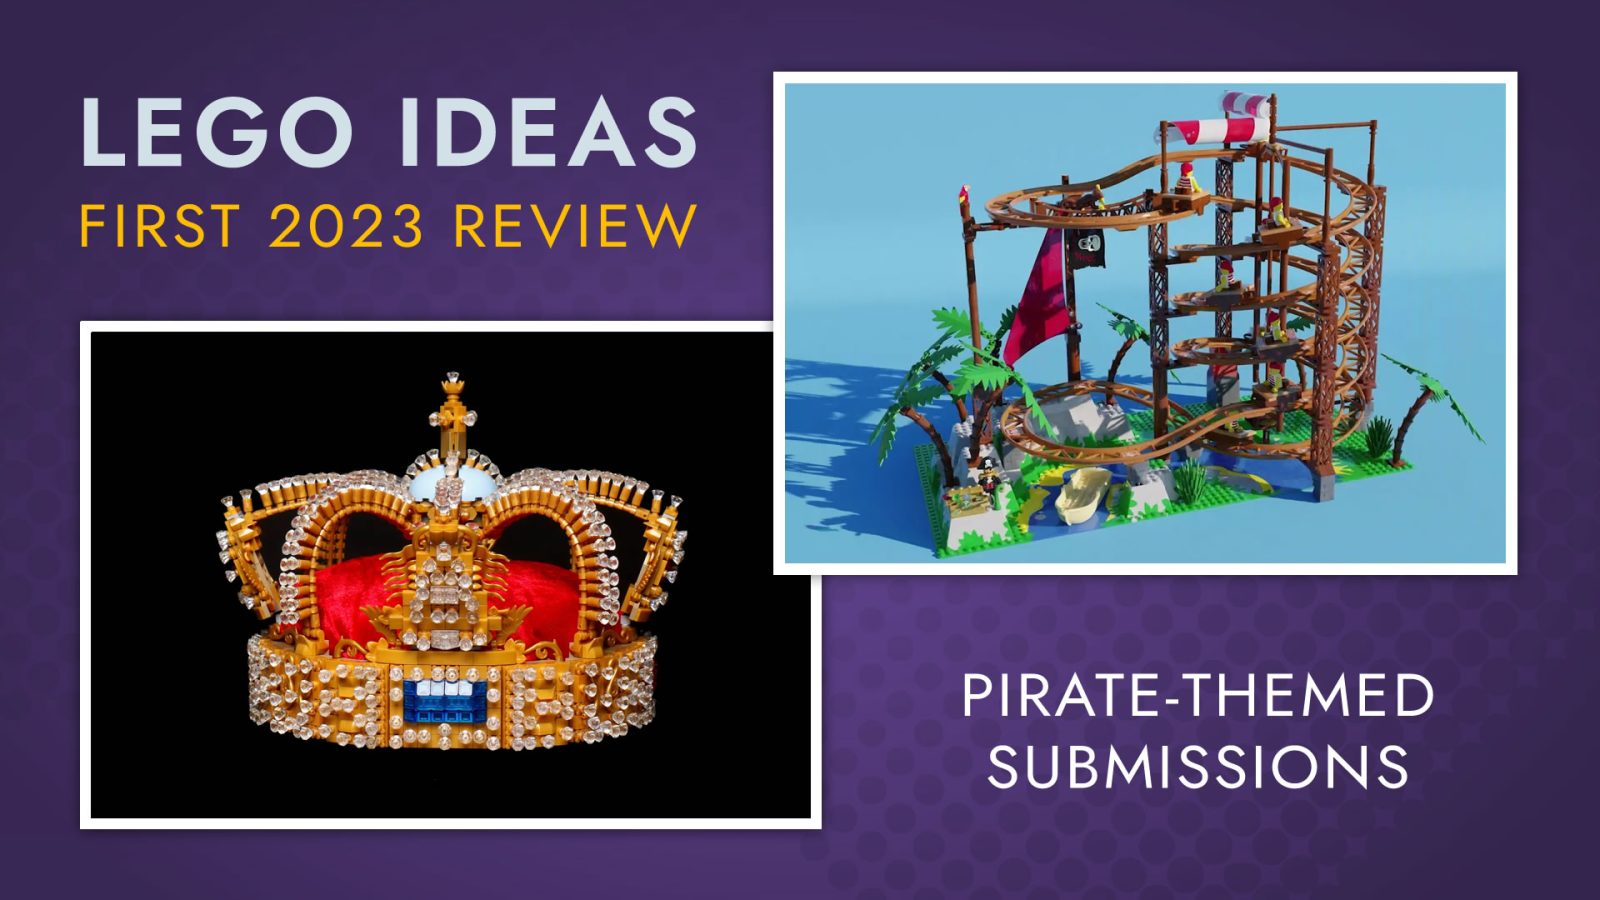 Pirate Submissions in the LEGO Ideas first 2023 Review